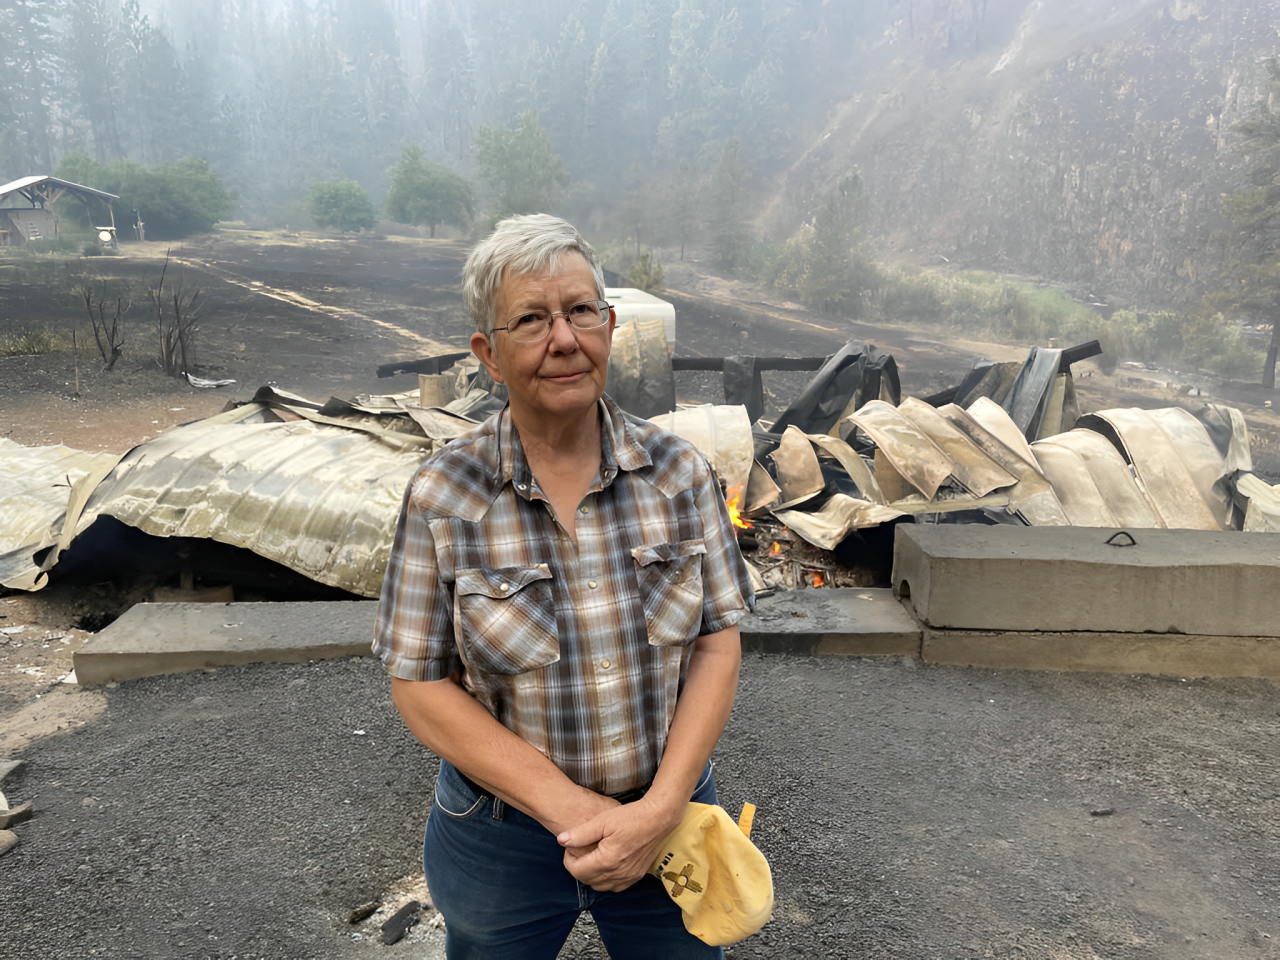 Idaho Community Unites to Support Marsha Schoeffler After Wildfire Destroys Her Home!